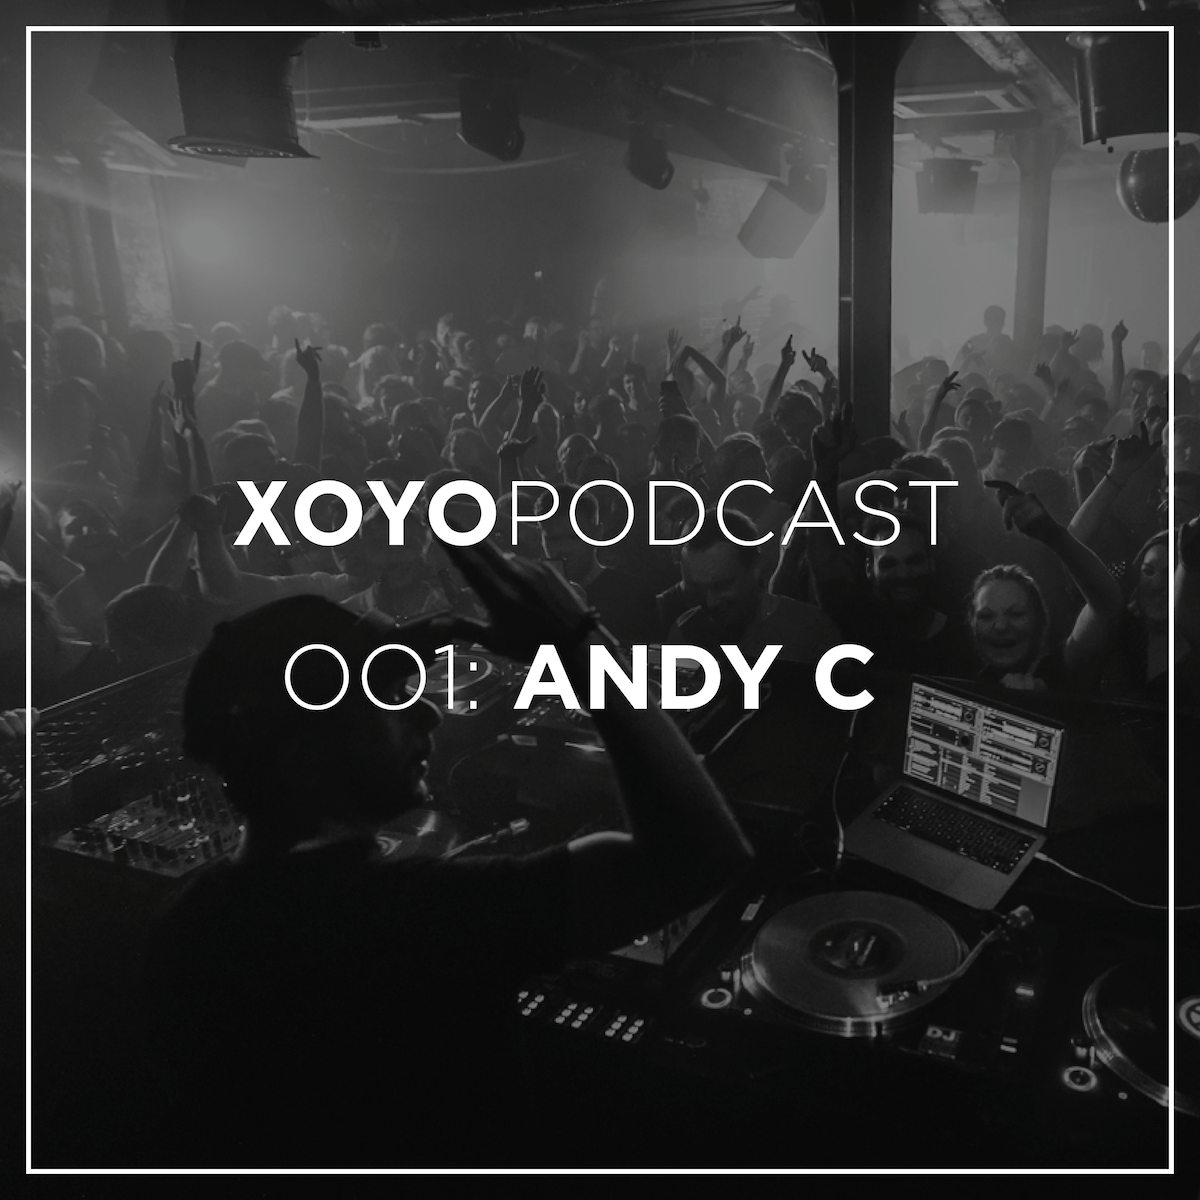 London's XOYO launches podcast with Andy C image